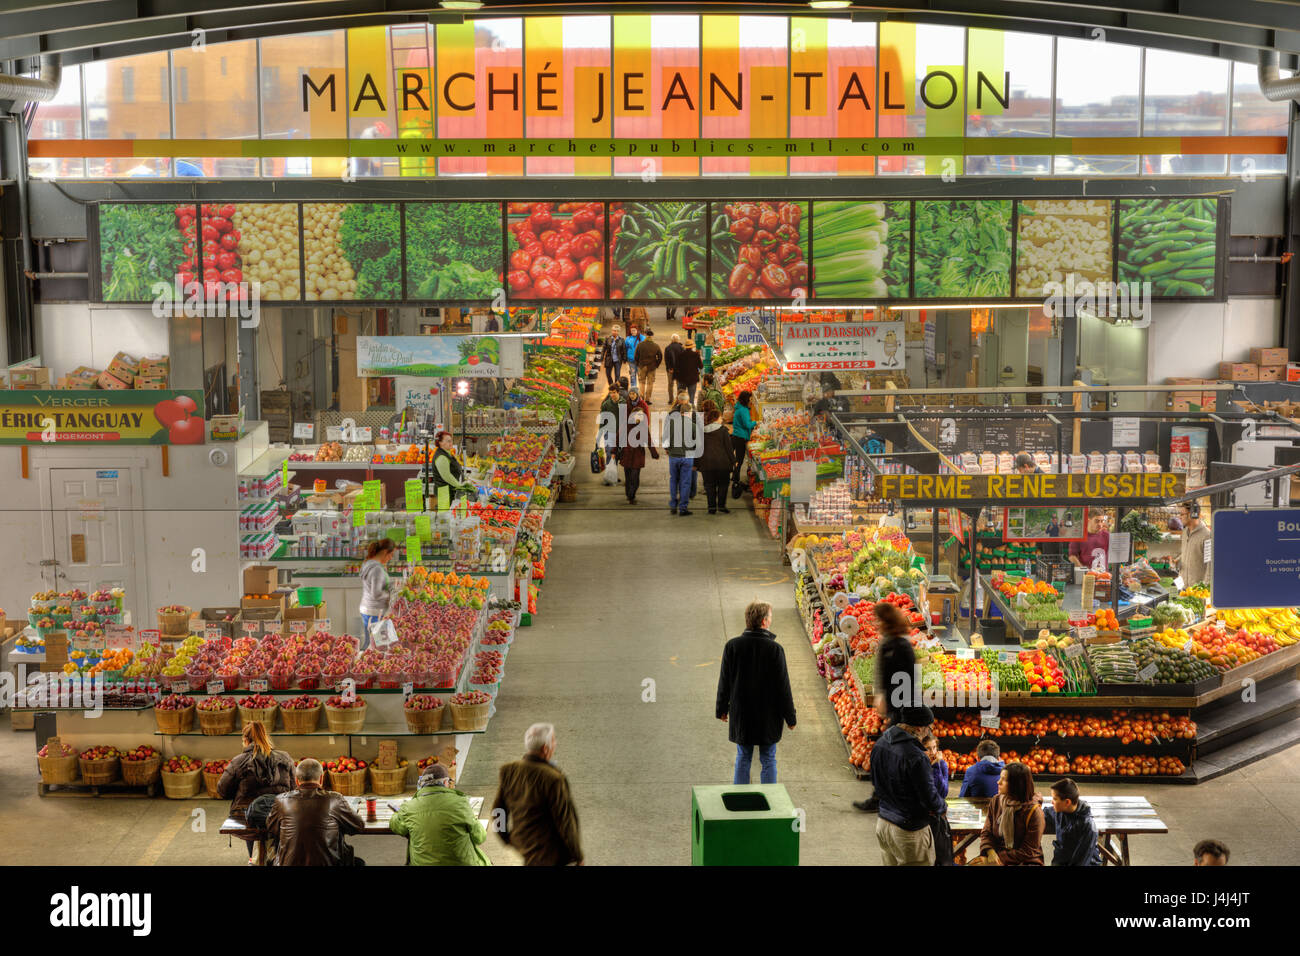 Marché Jean-Talon, a market in Petite Italie (Little Italy), Montreal, Quebec, Canada. Stock Photo